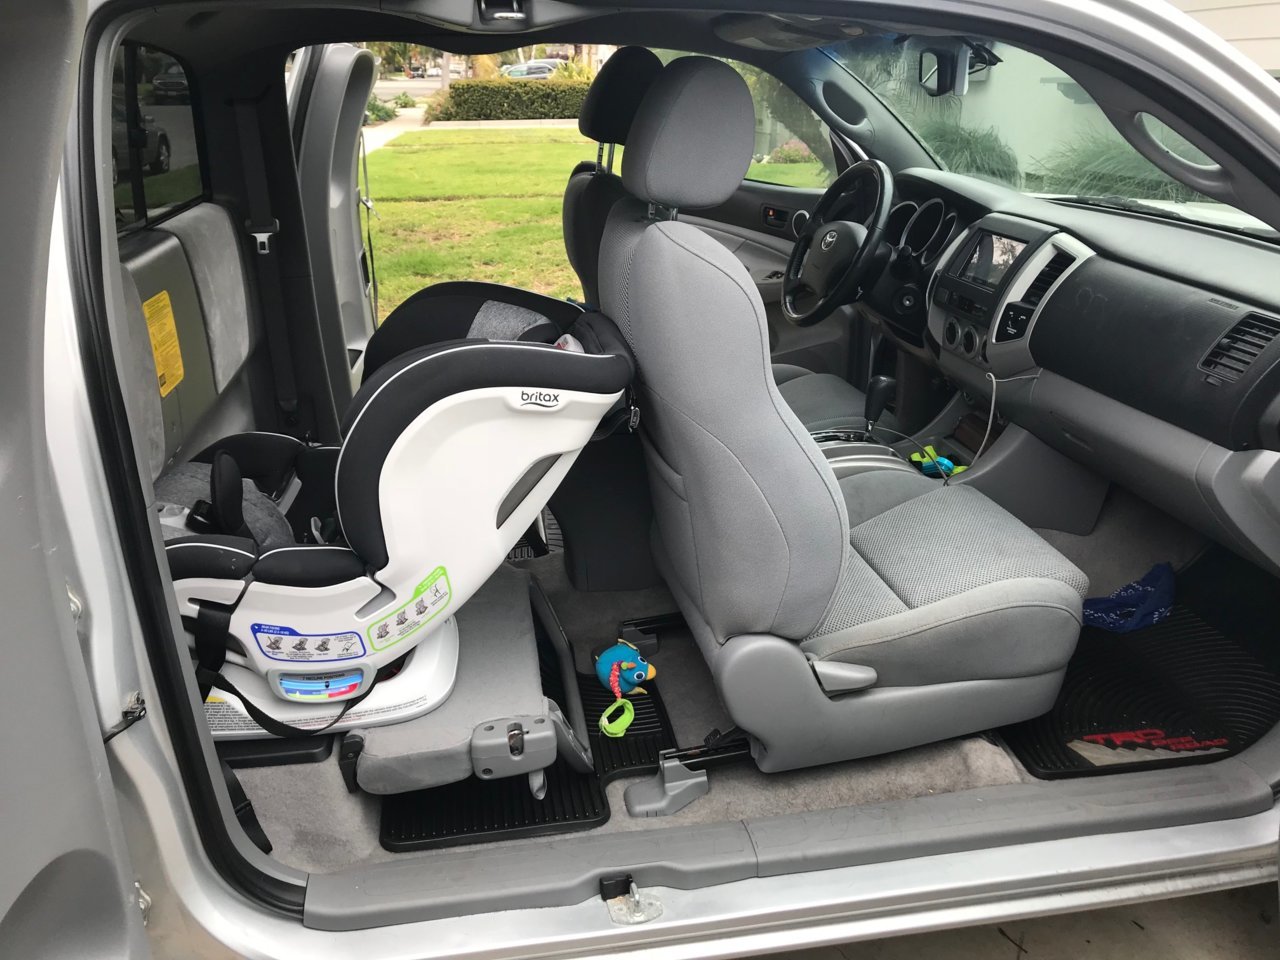 Rear Facing Car Seat In Access Cab, Where To Put Car Seat In Extended Cab Truck